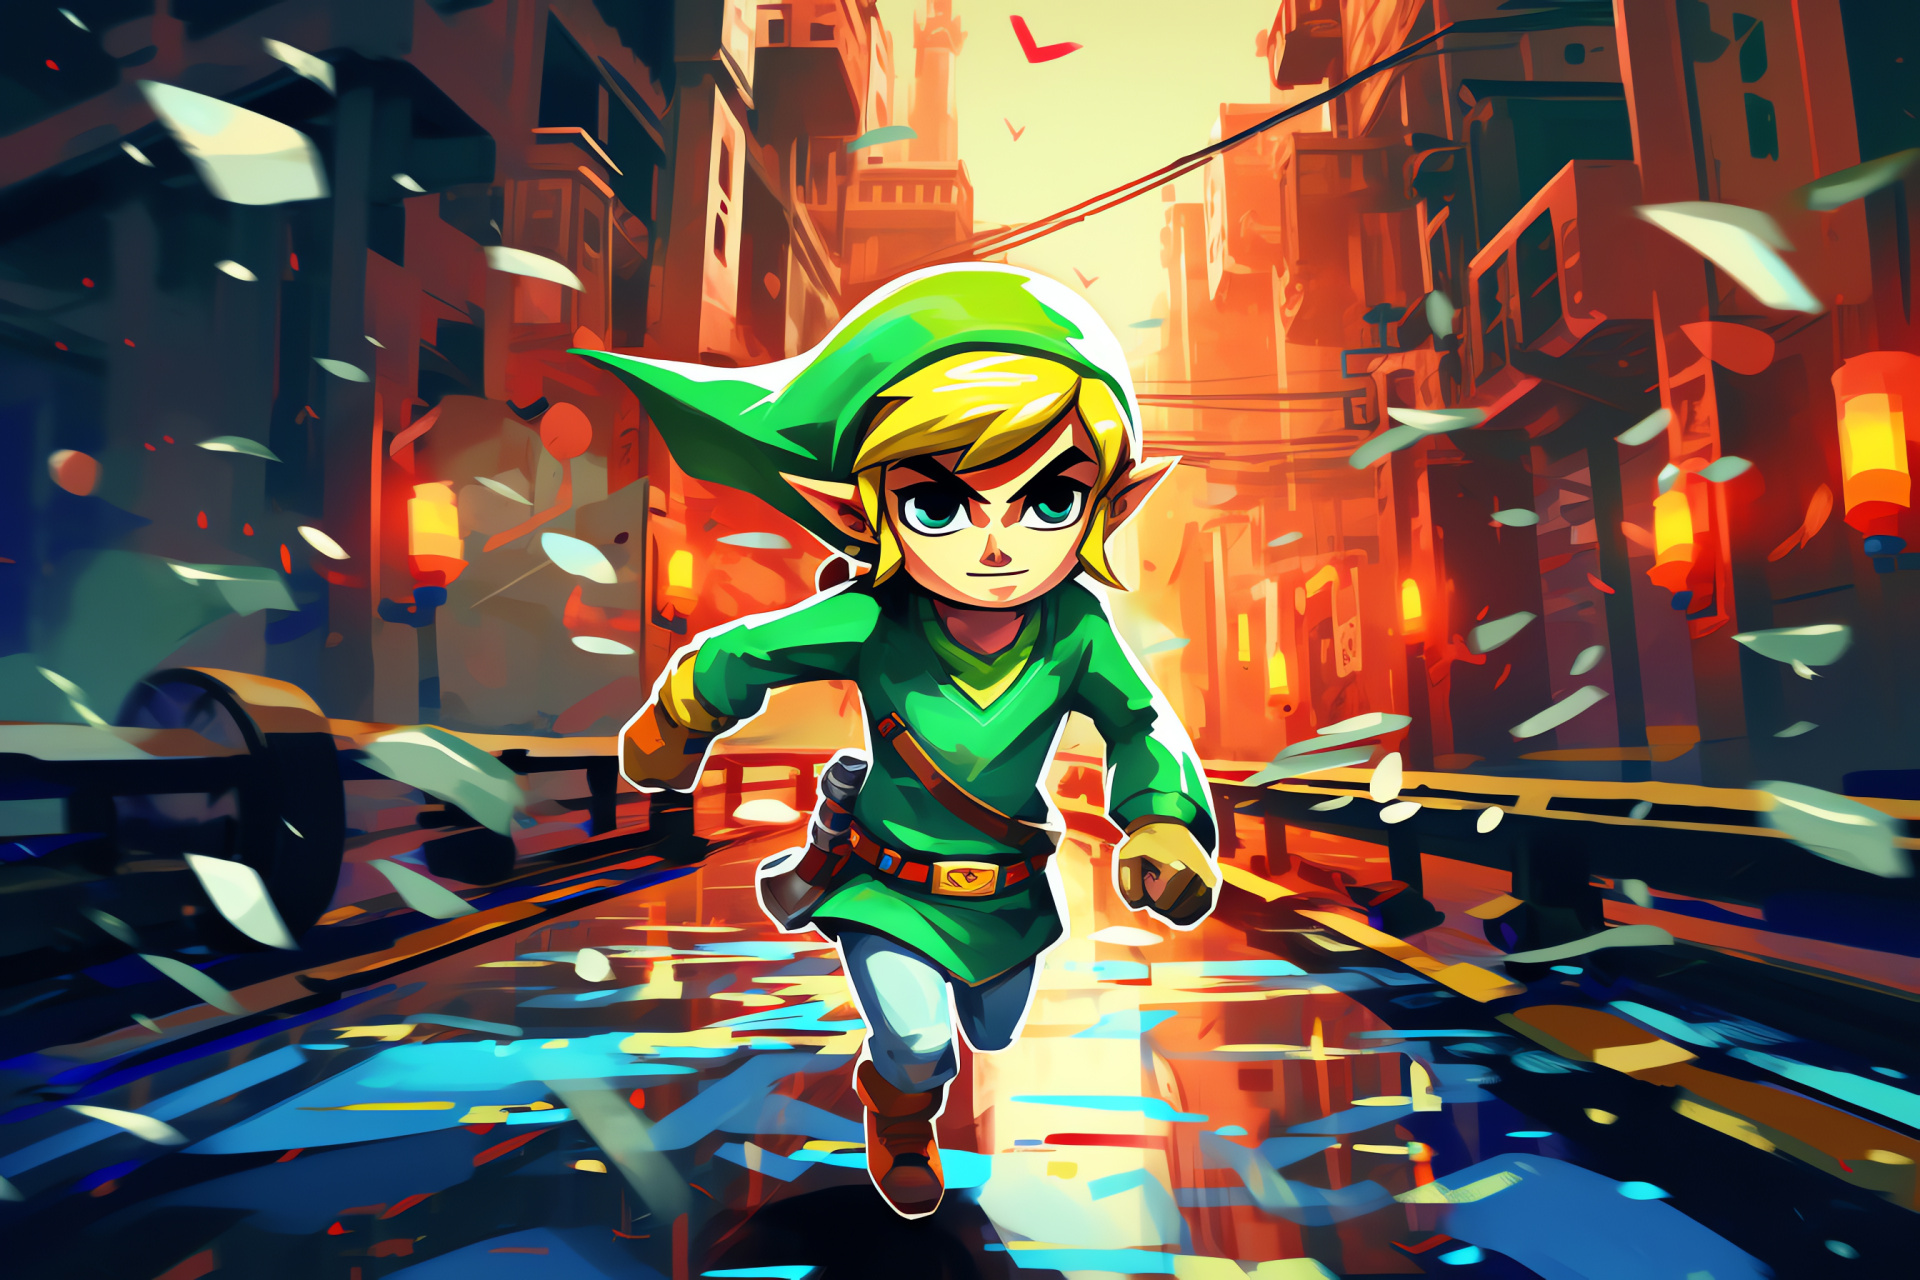 Toon Link pursuit, Narrow alley dash, Accelerated motion sequence, Mediterranean style setting, Gaming speed chase, HD Desktop Image